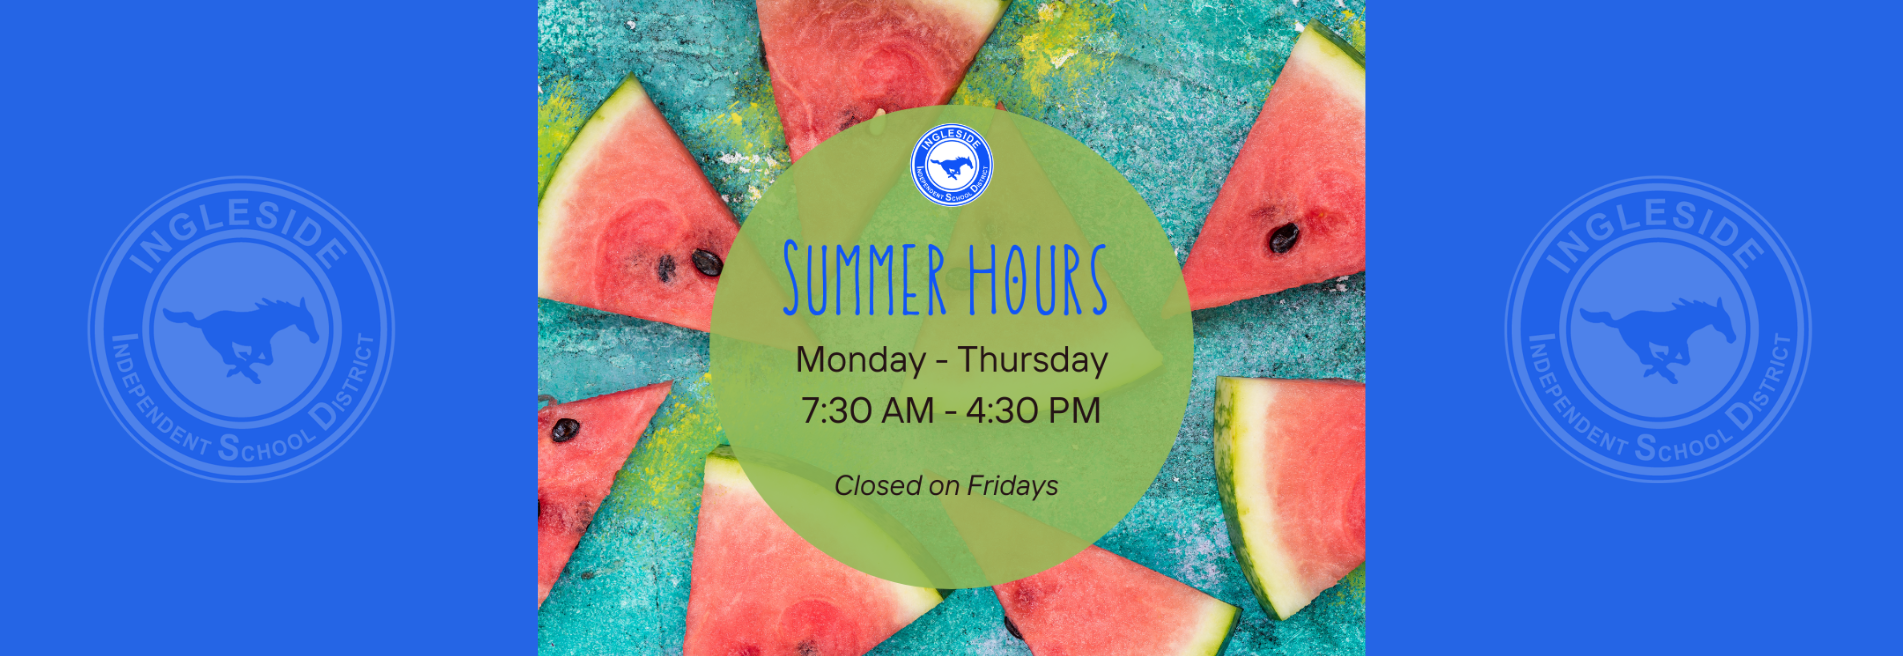 Summer Hours Monday-Thursday 7:30 AM - 4:30 PM Closed on Fridays